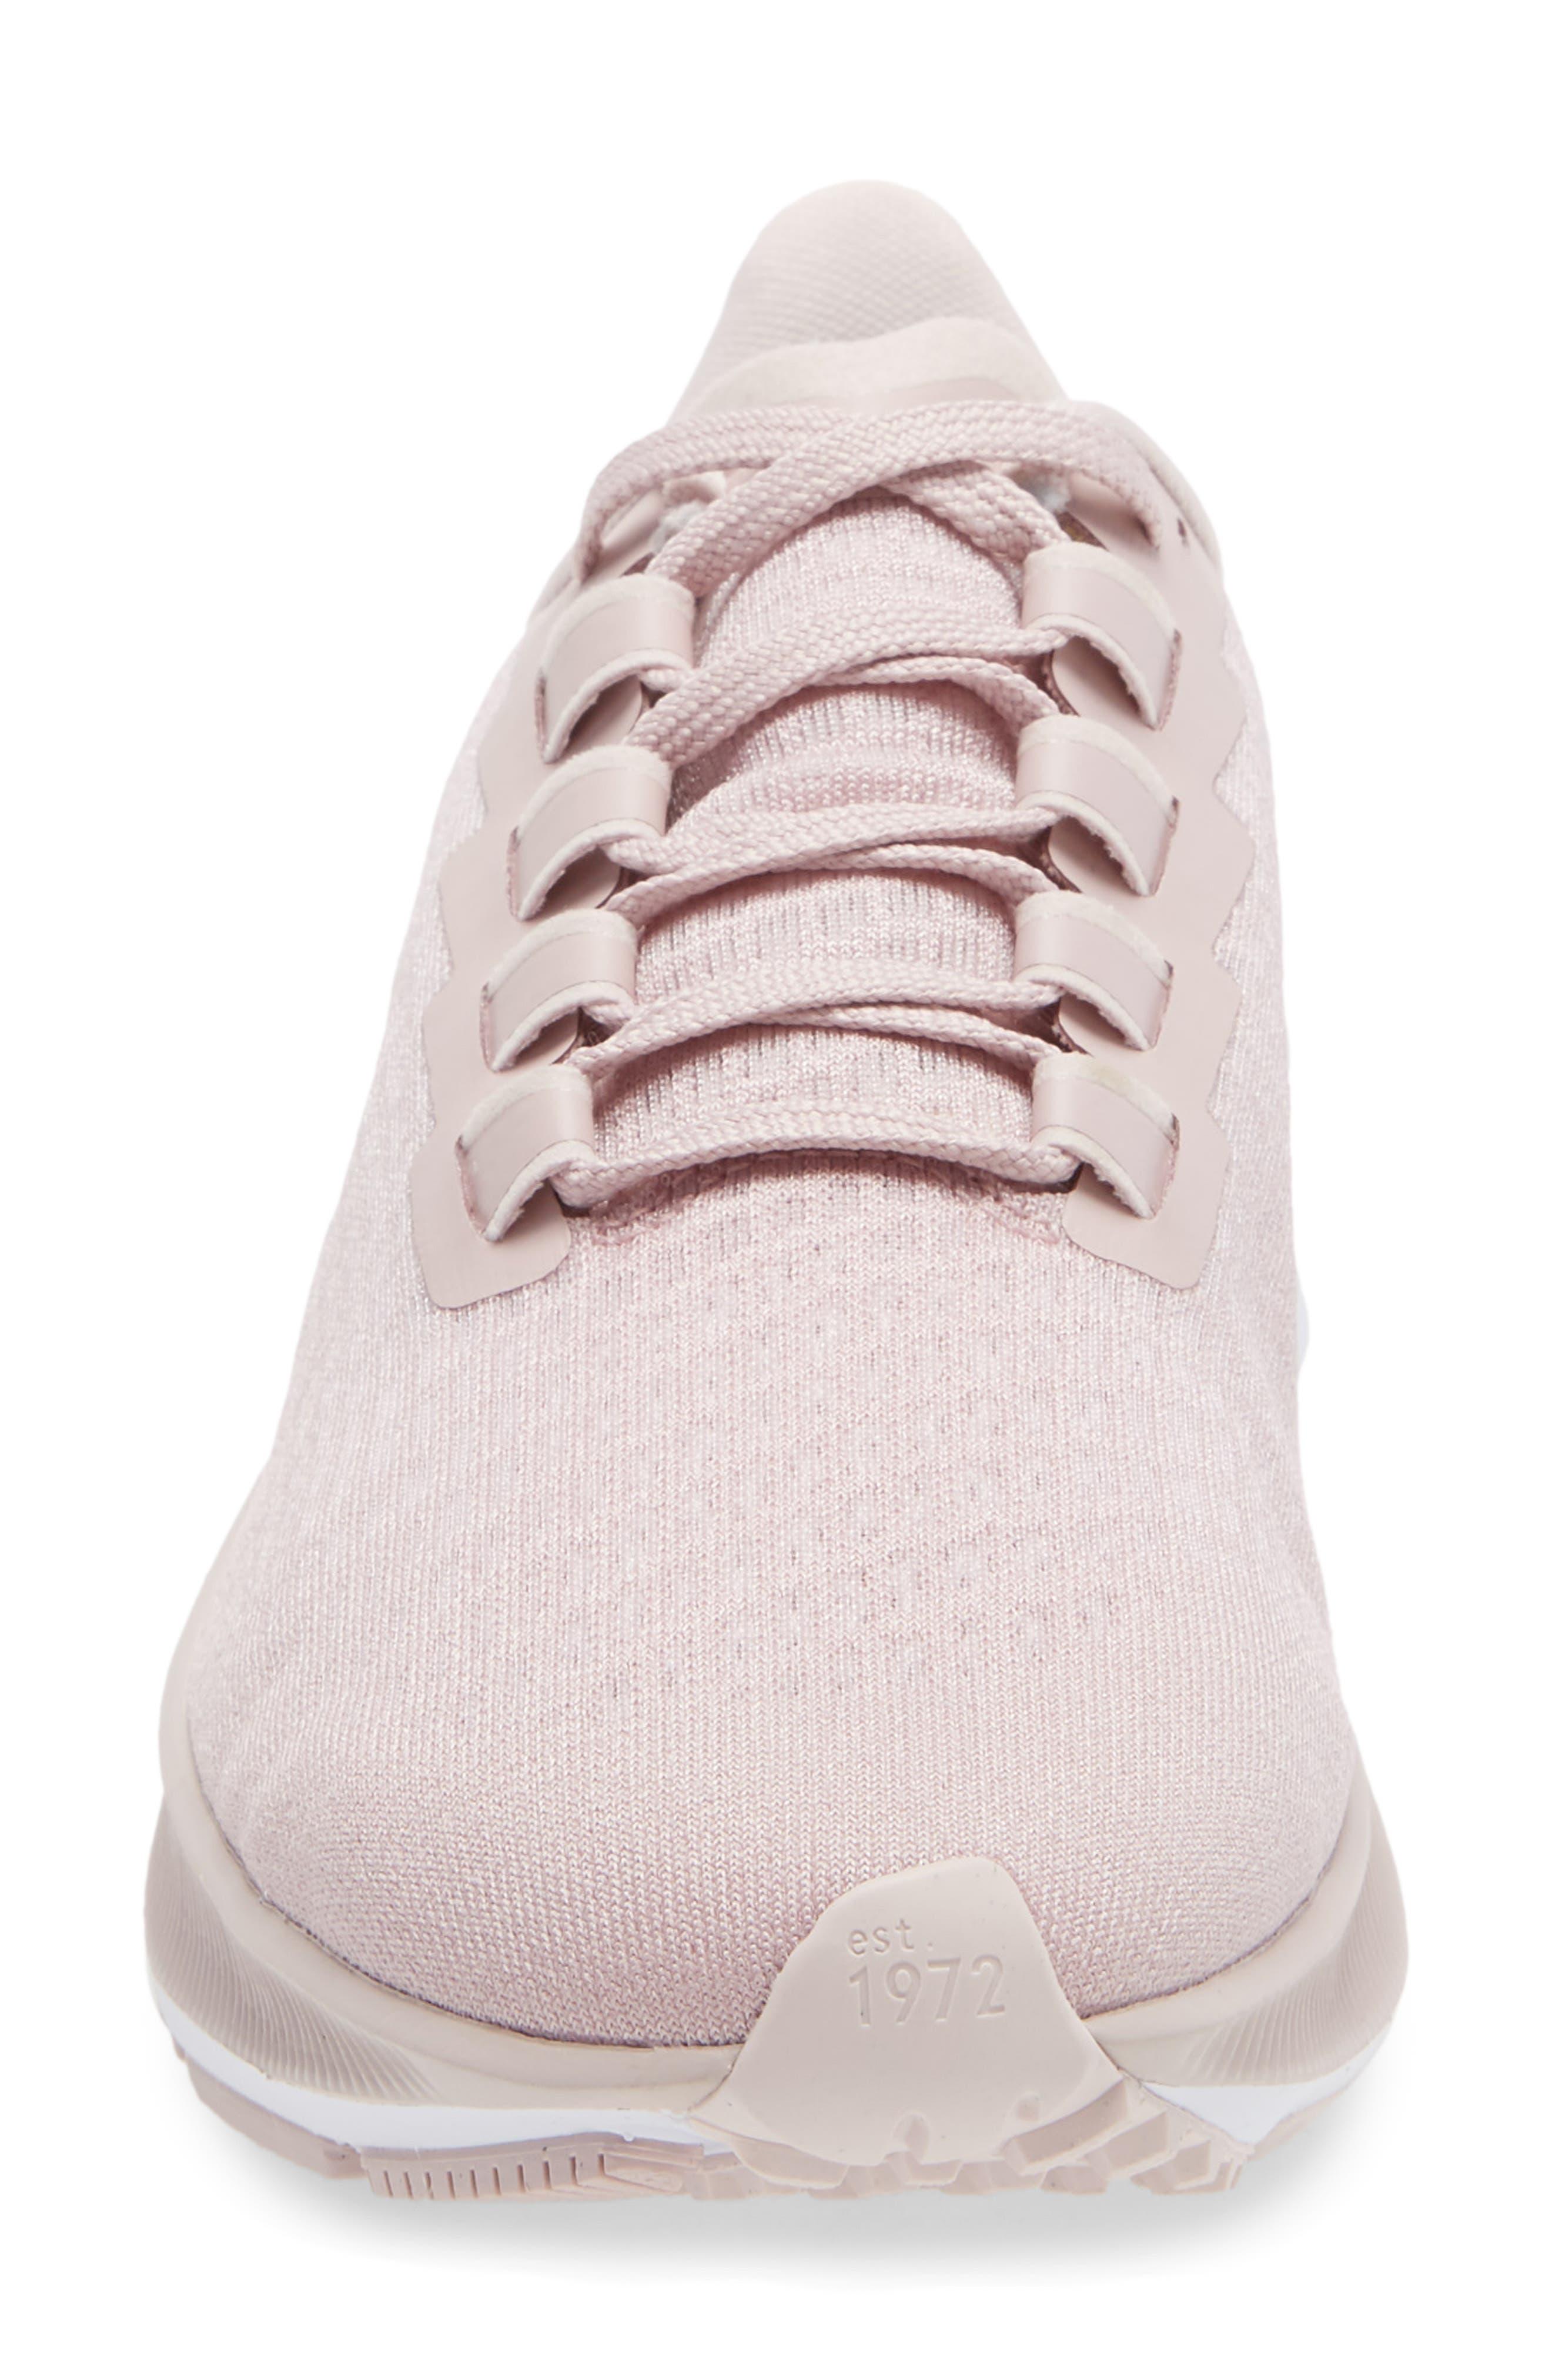 Nike Air Zoom Pegasus 37 Running Shoe In Champagne/barely Rose/white At  Nordstrom Rack | Lyst